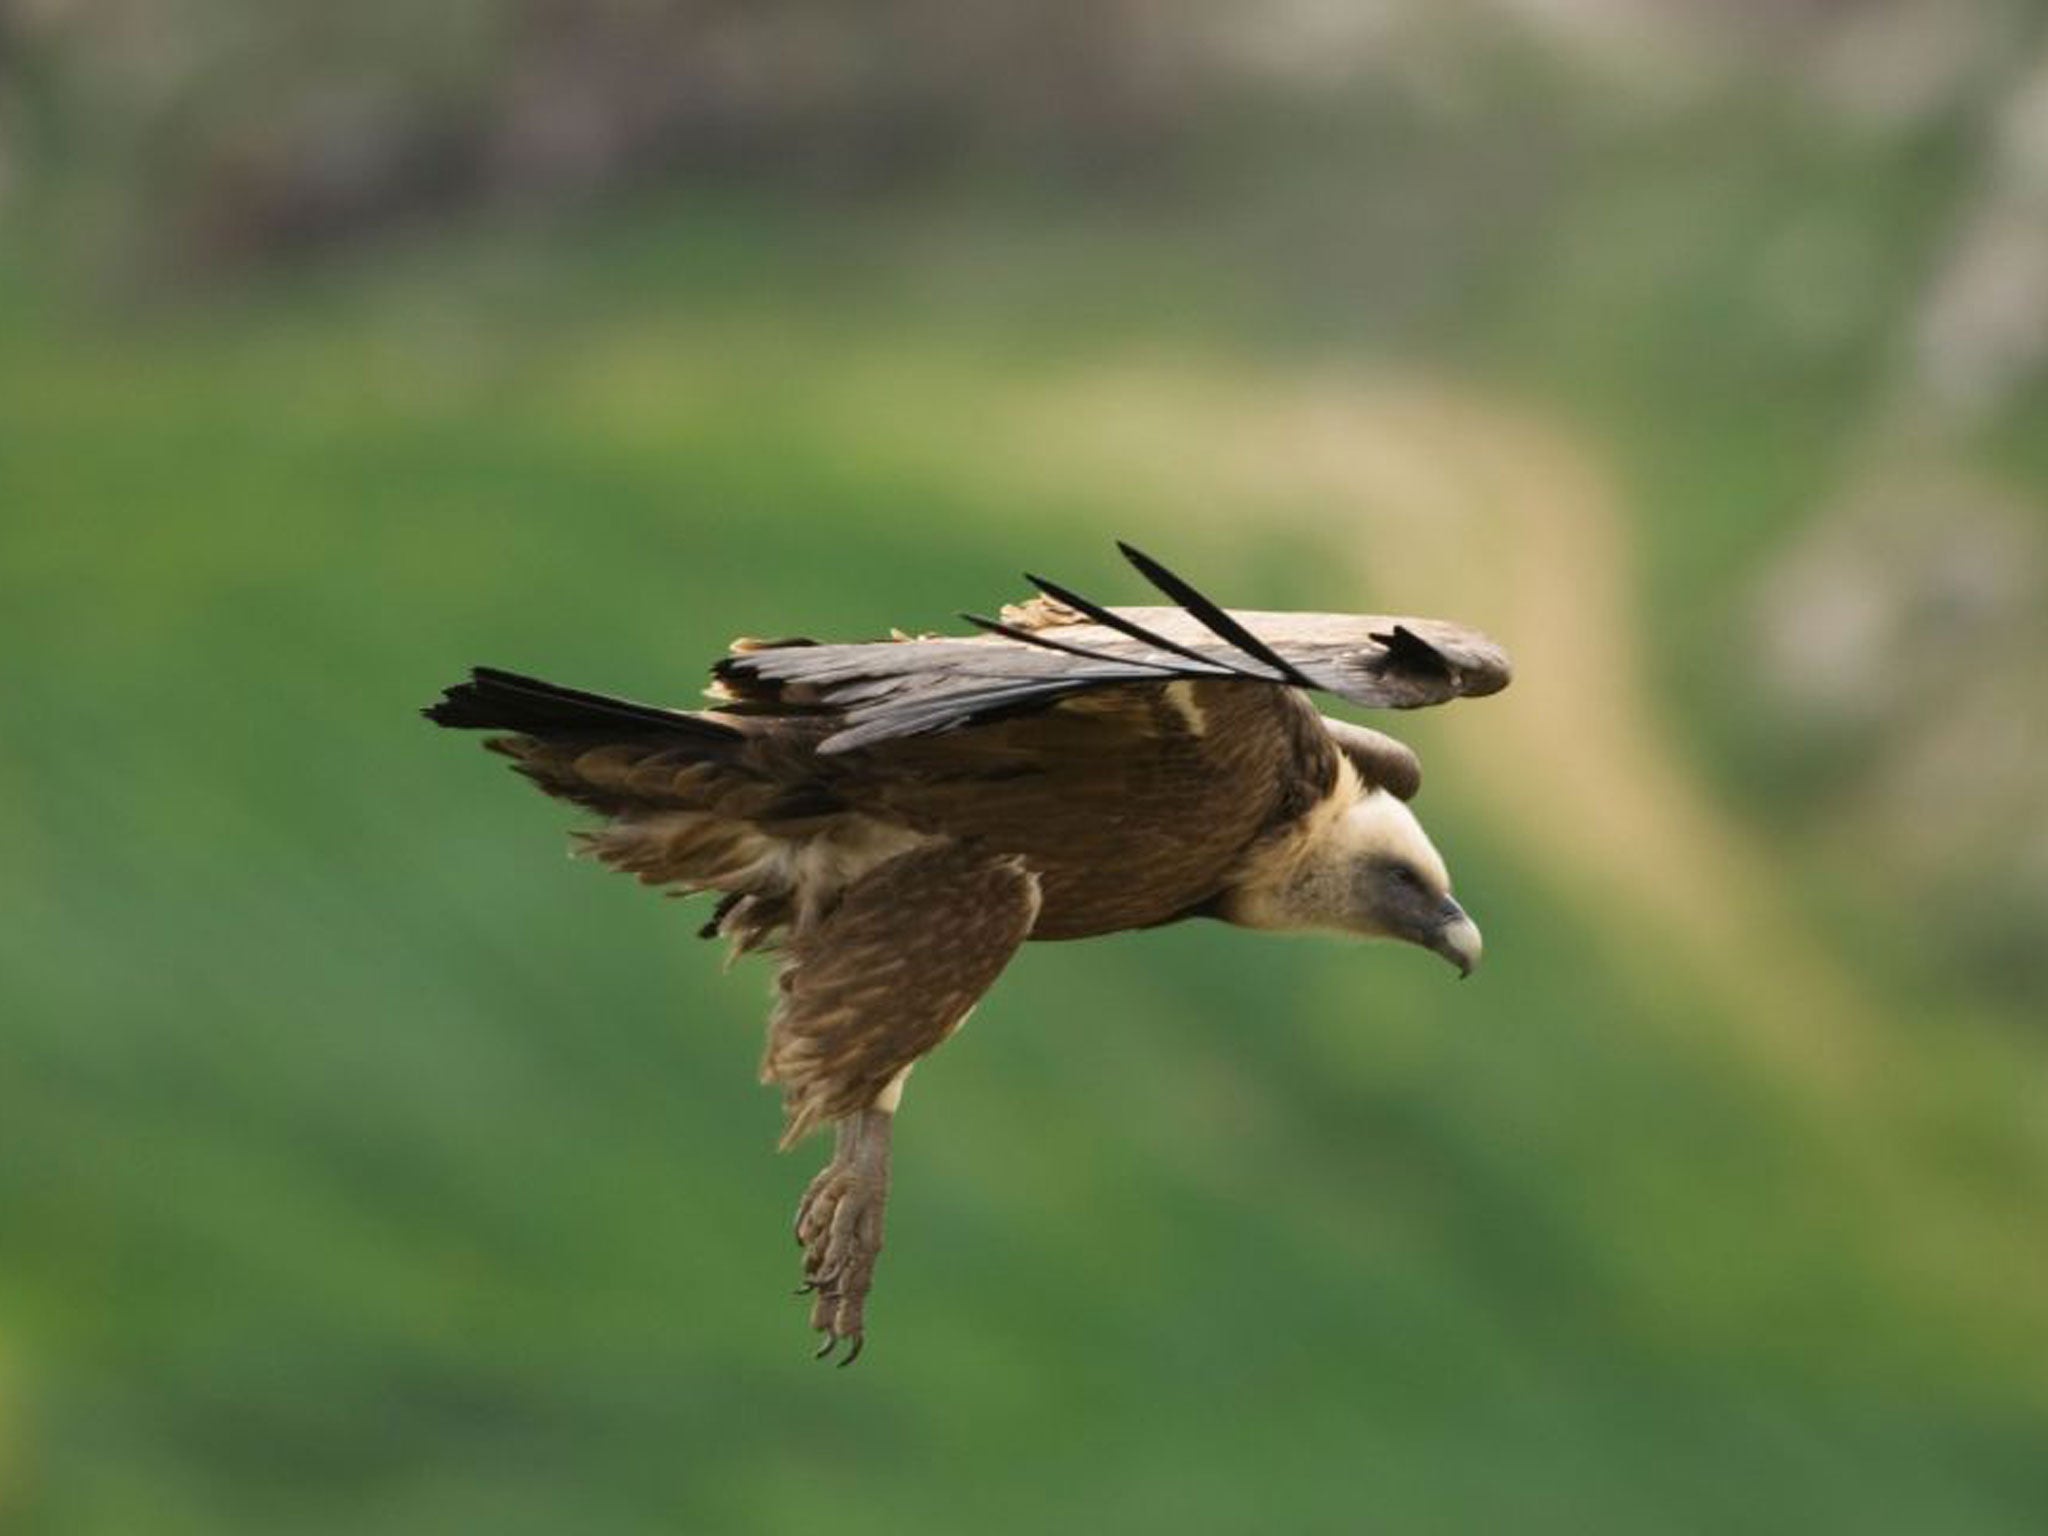 The Griffon vulture was fitted with a GPS transmitter